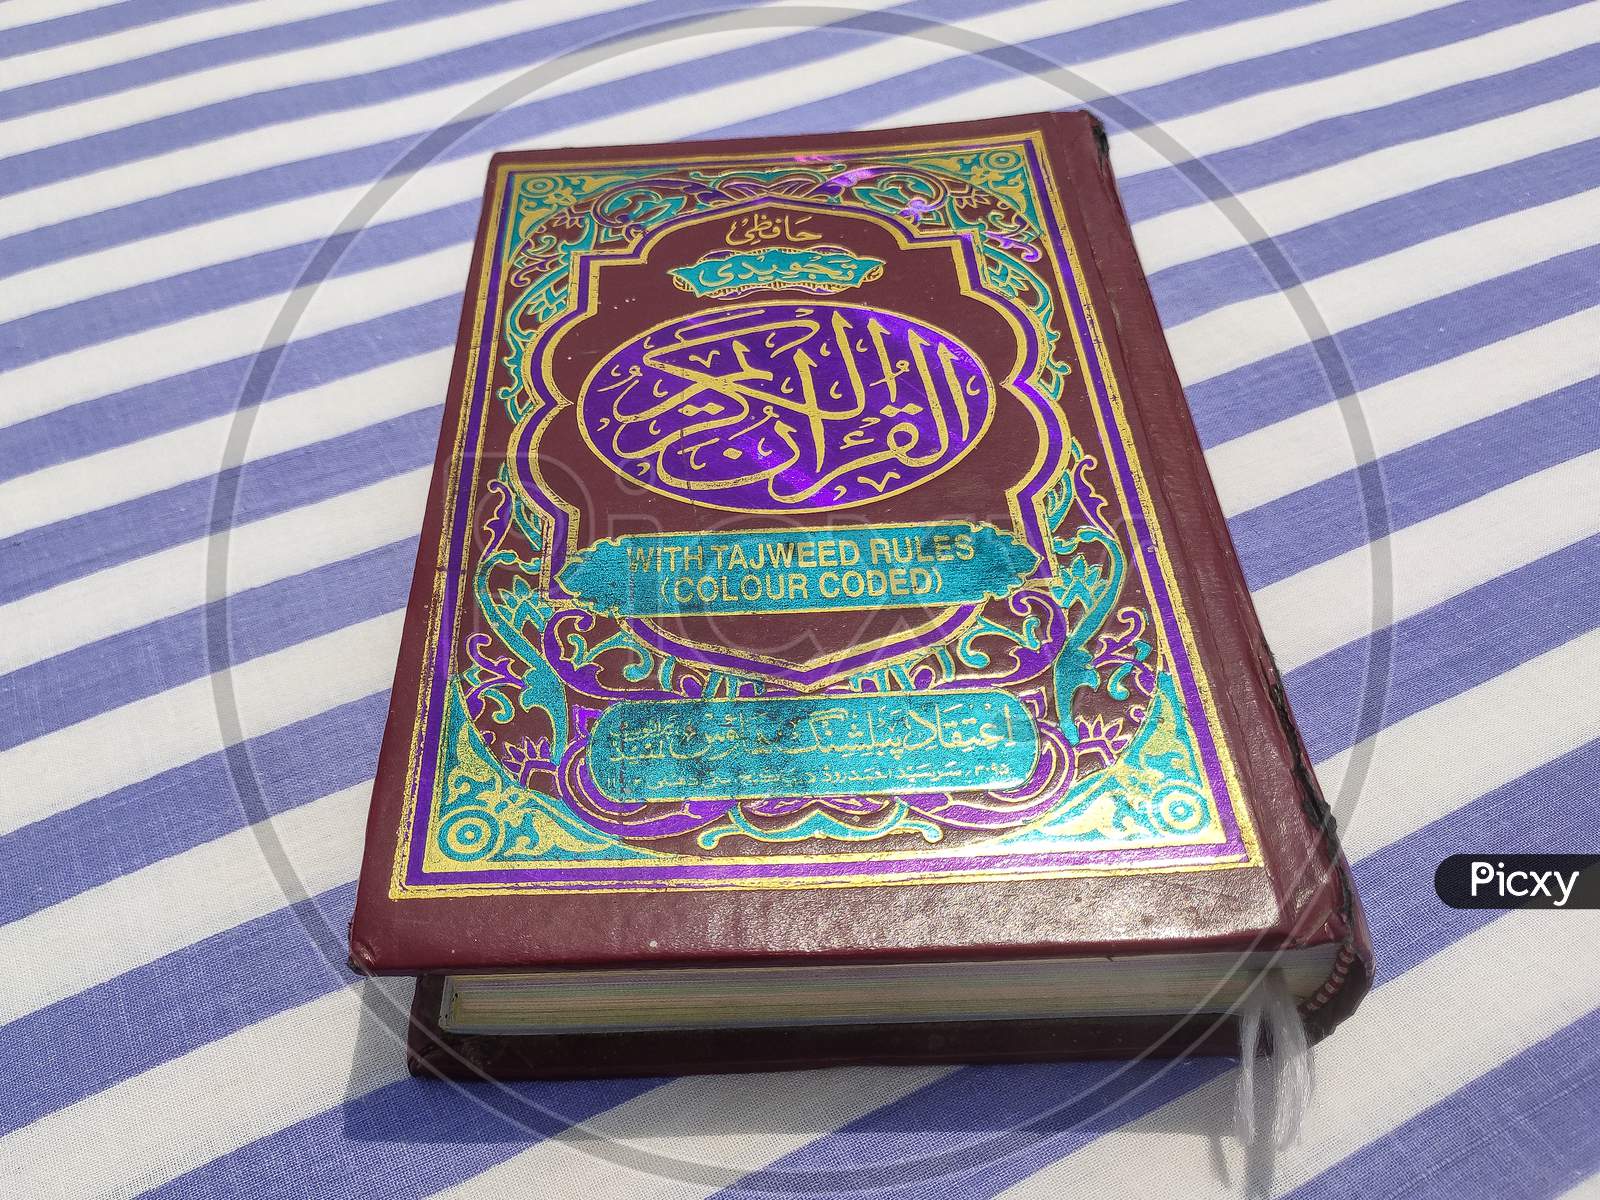 Cover photo of holy Quran with textured background.